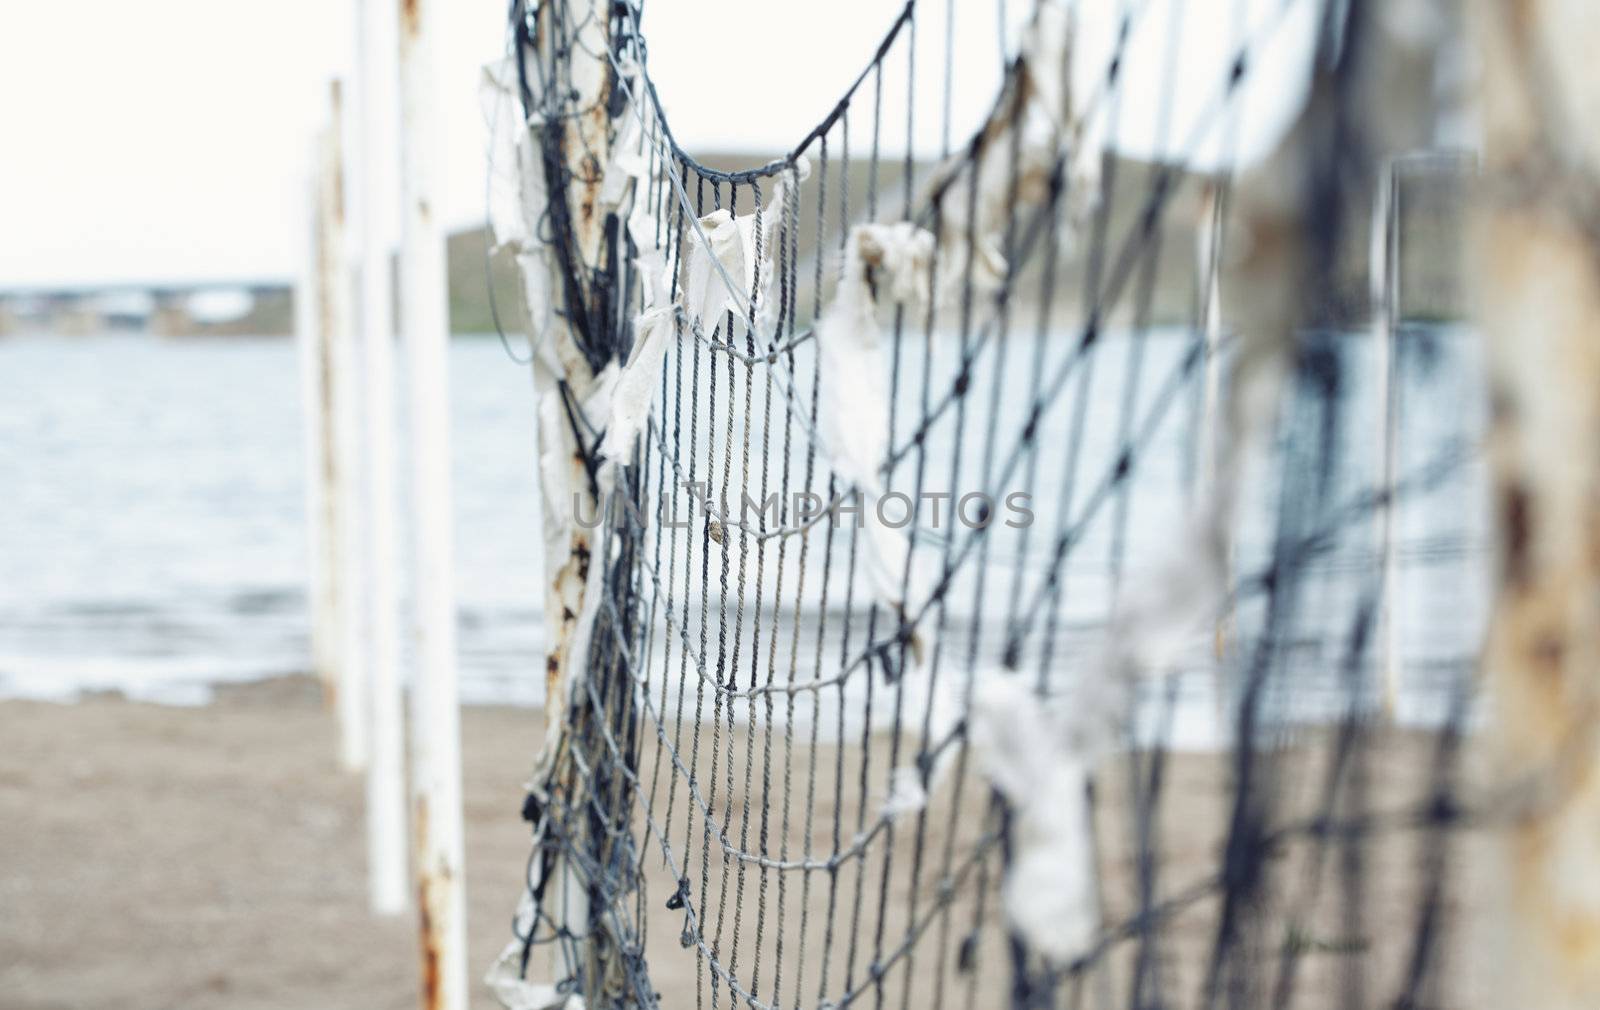 Old net attached to the poles at the beach. Shallow depth of field added for more natural view